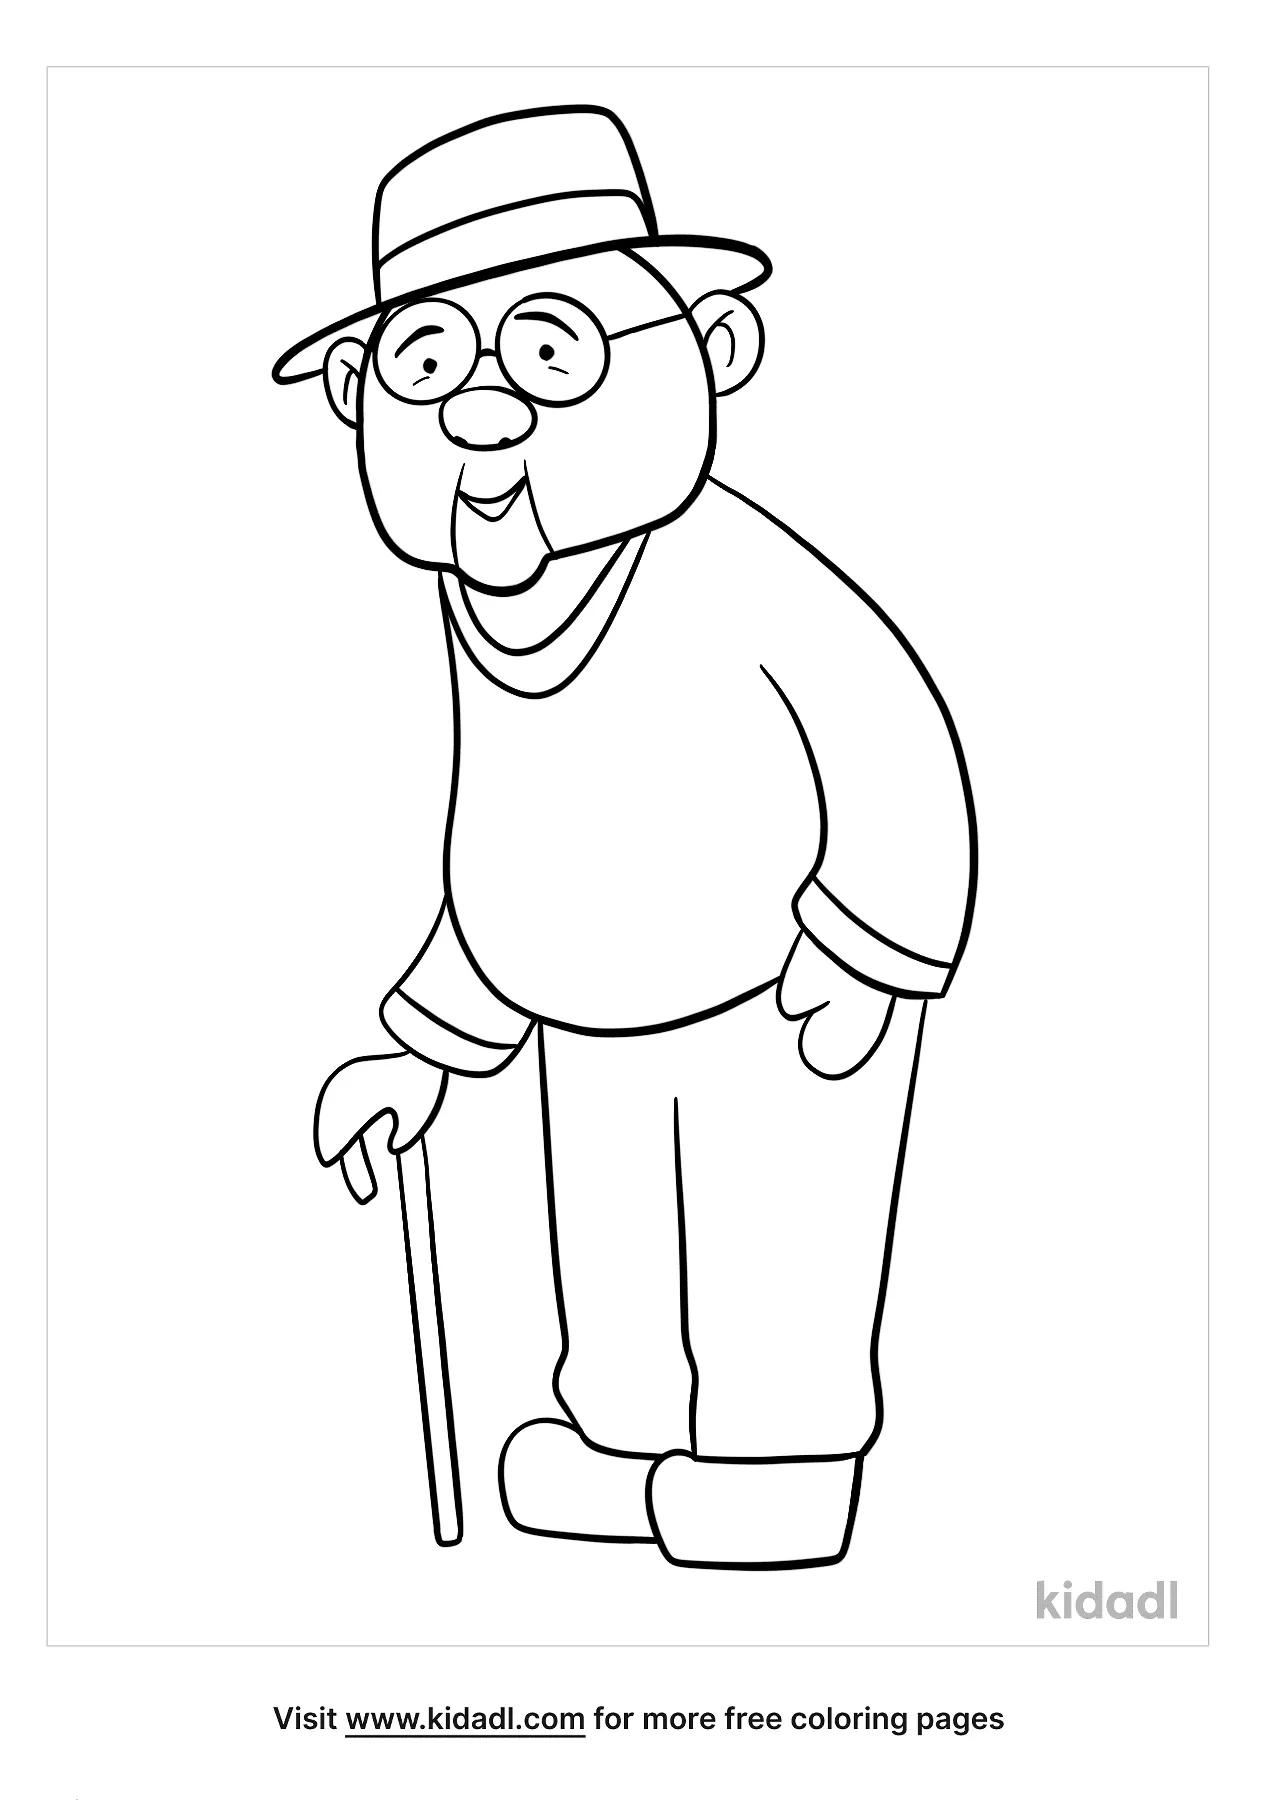 old man jenkins coloring pages